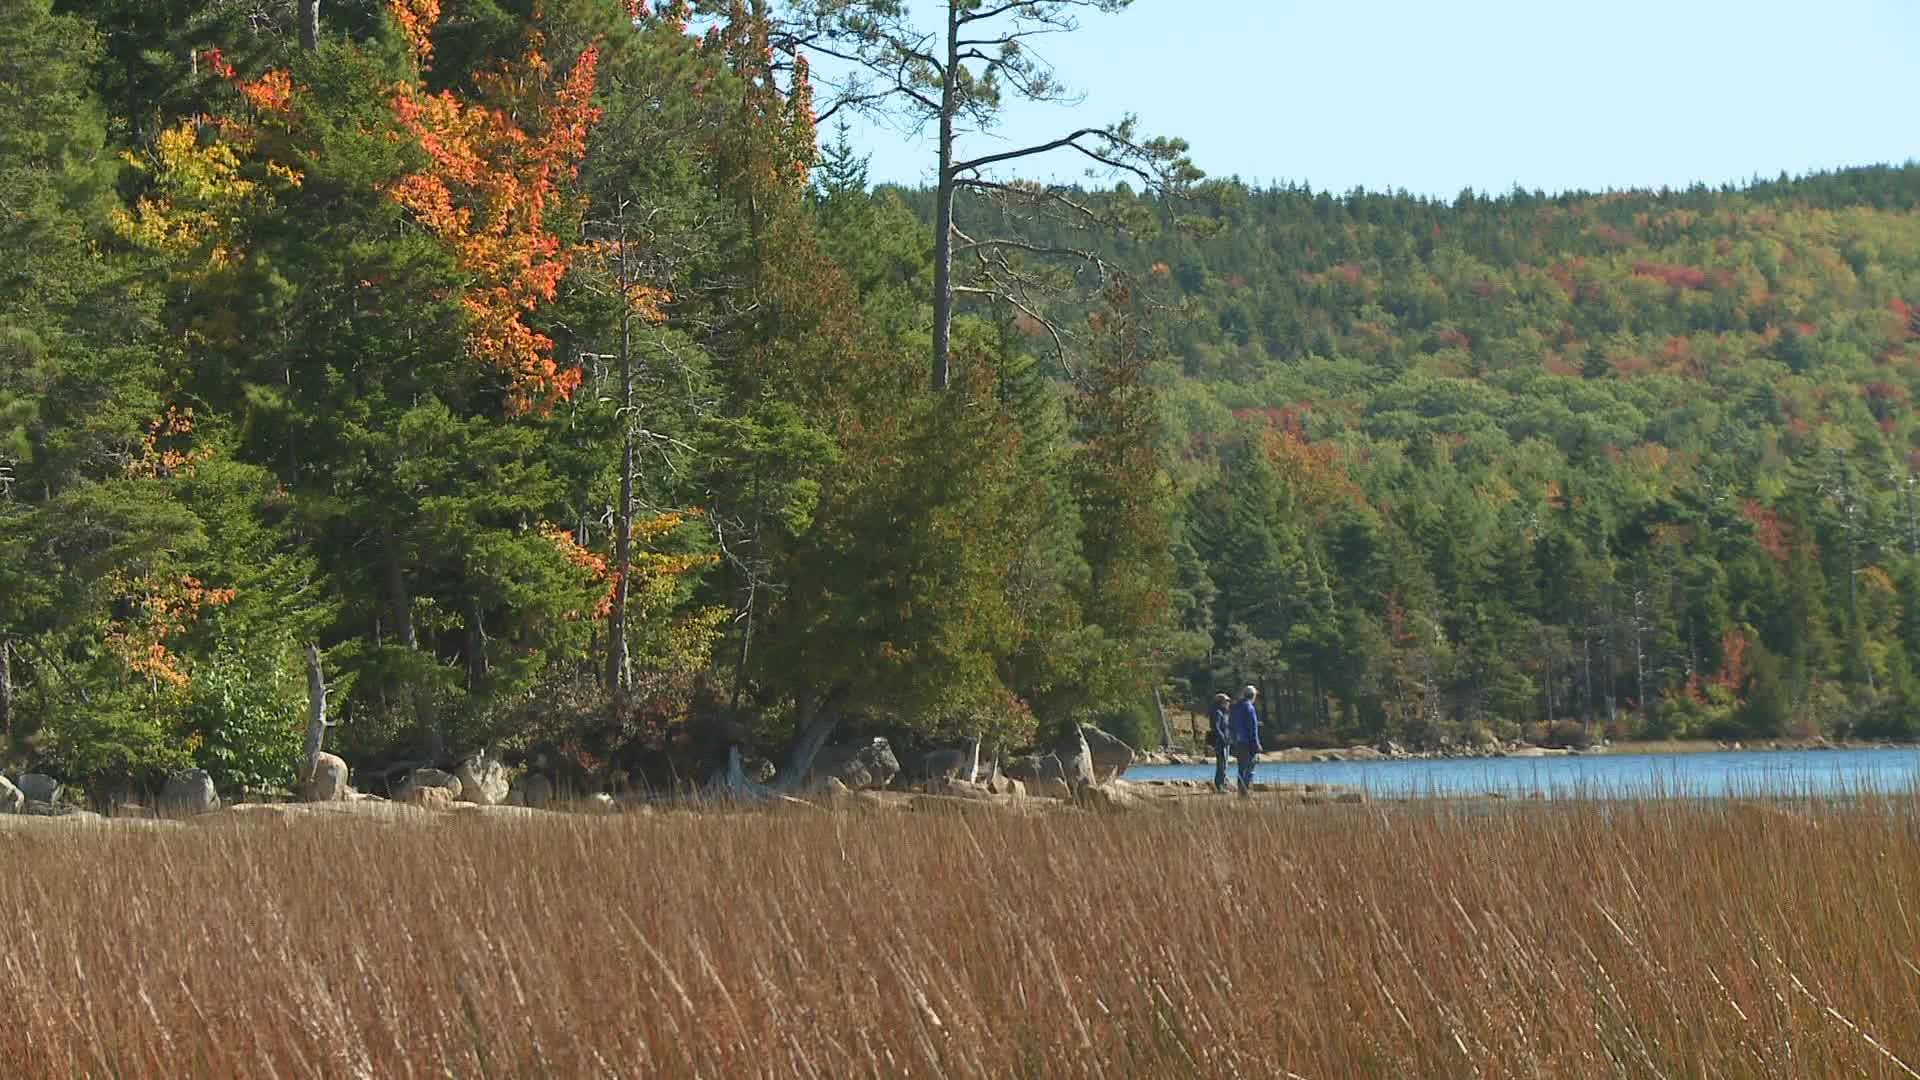 The U.S. Centers for Disease Control and Prevention say COVID-19 transmission is at high levels in Hancock, Penobscot, Piscataquis, and Washington counties.